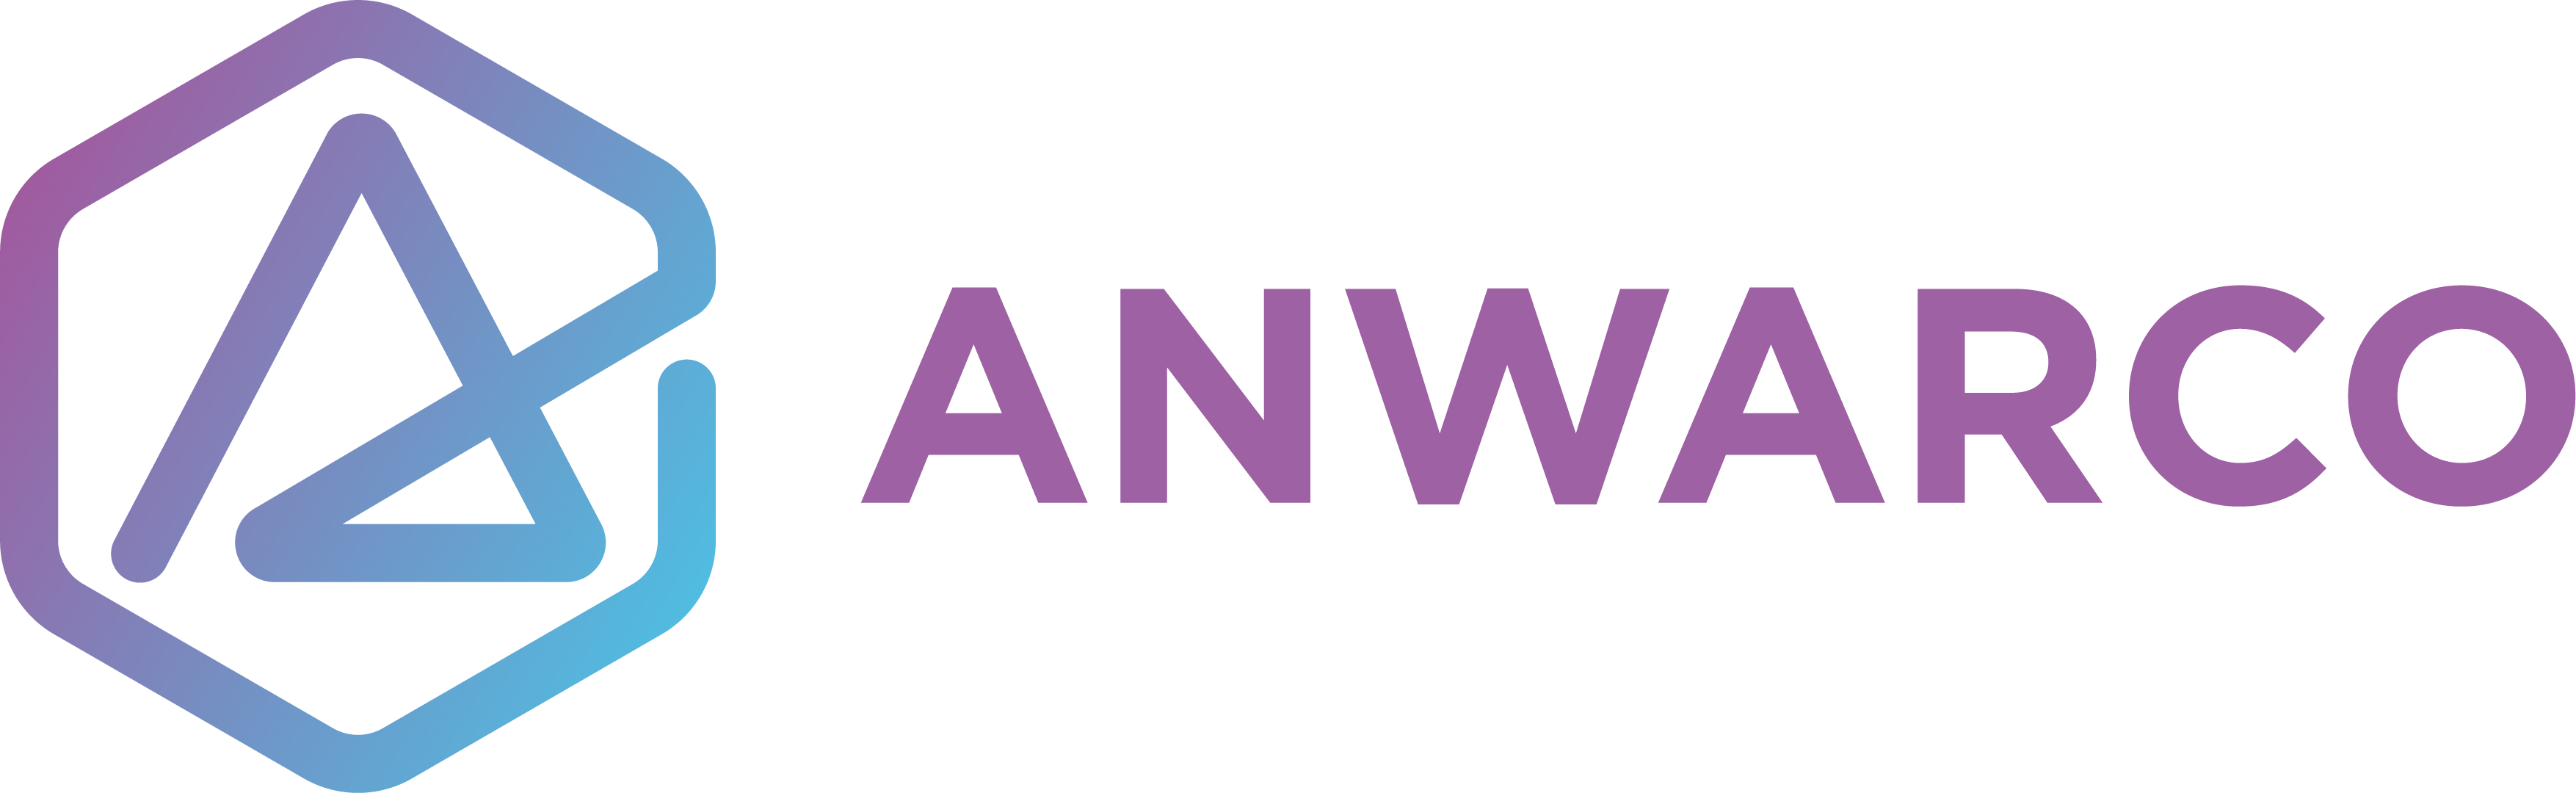 Anwarco Center